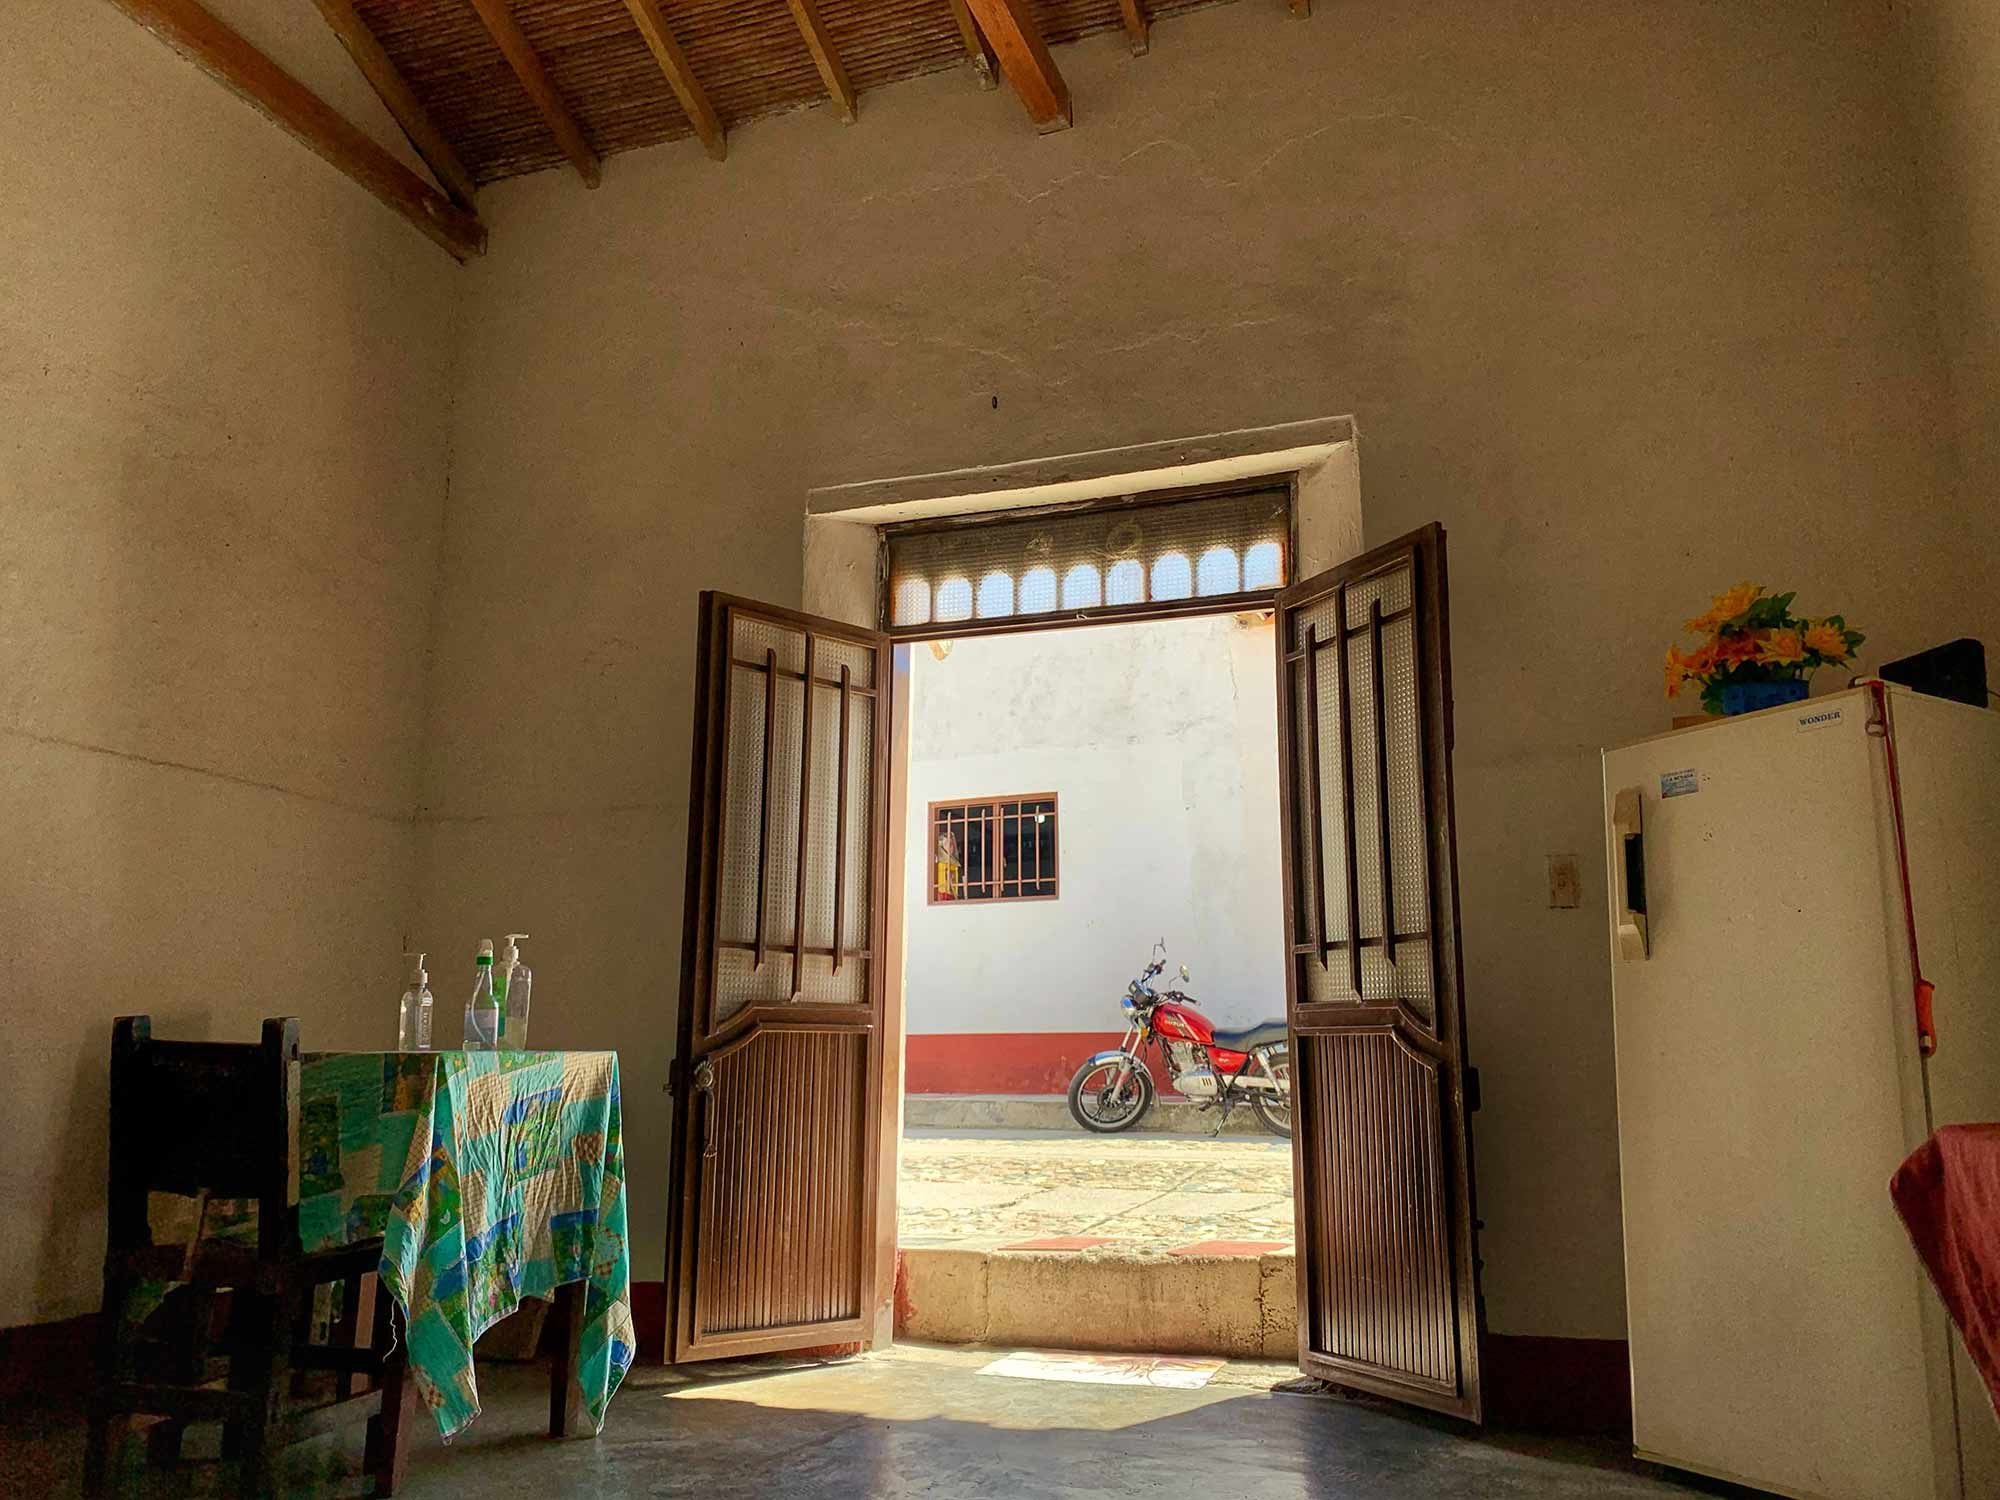 From inside a local restaurant, with La Negra at my feet. Motorcycles are the most common method of transportation around here; I hope you enjoy the many photos I took of them throughout the town.